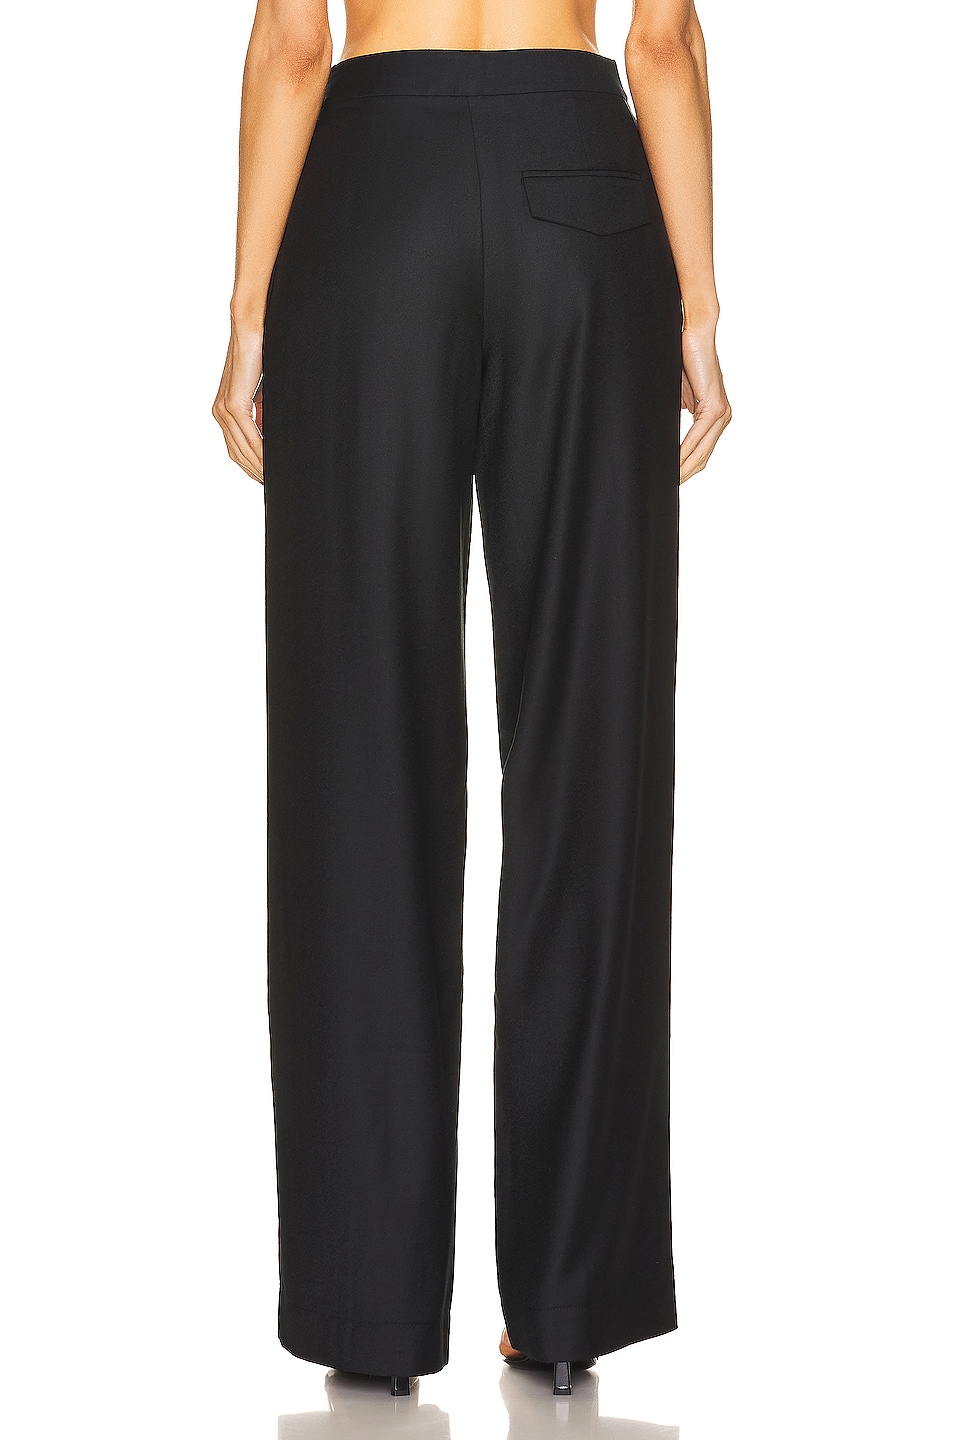 Aya Muse Cherry Blossom Pant in Black | FWRD